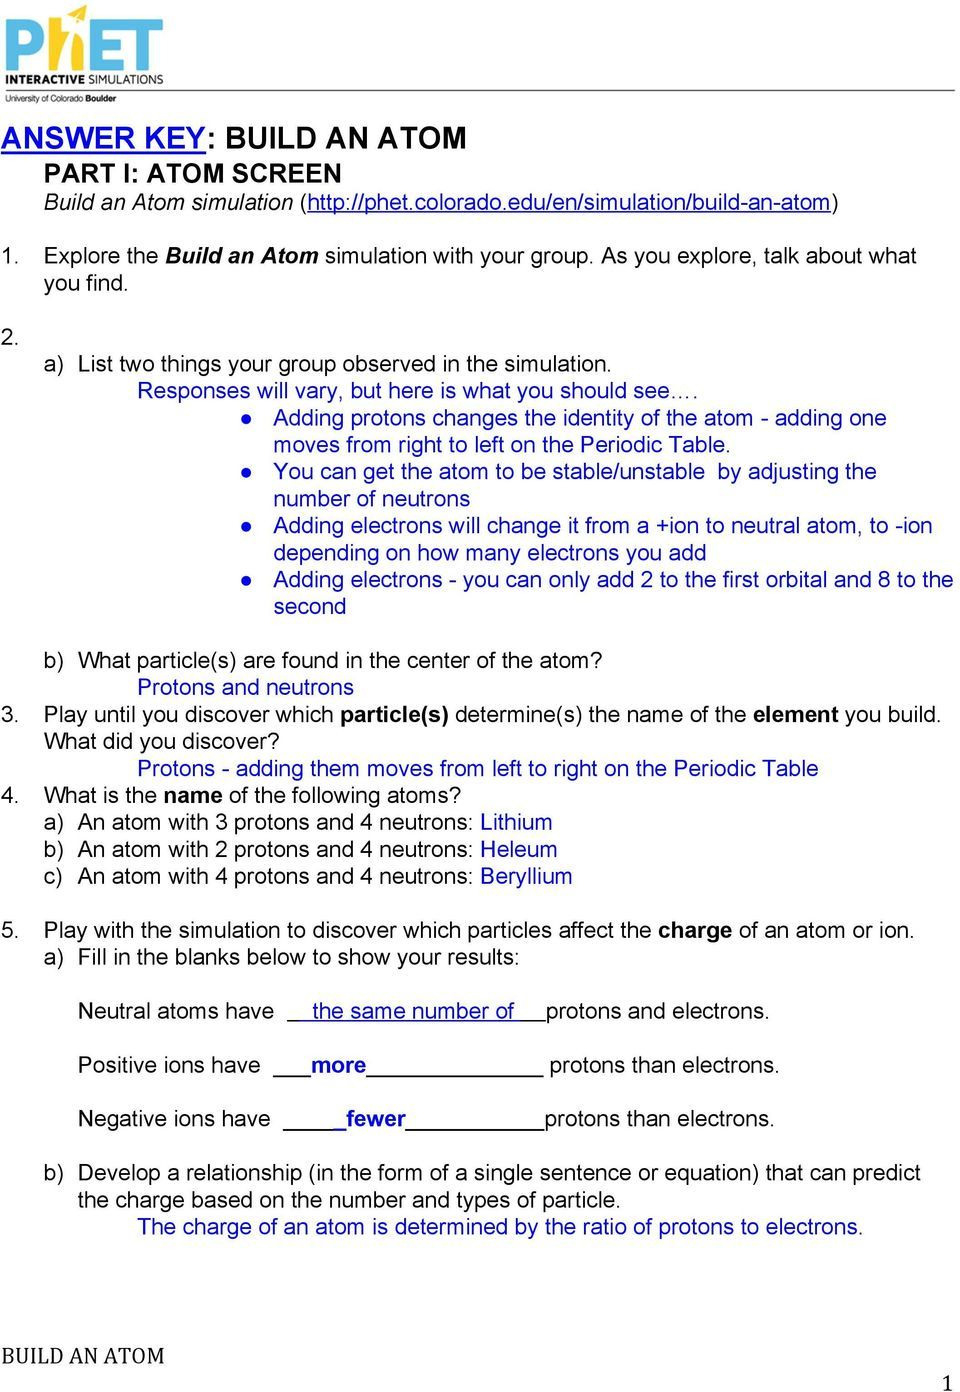 introduction-to-biology-worksheet-answers